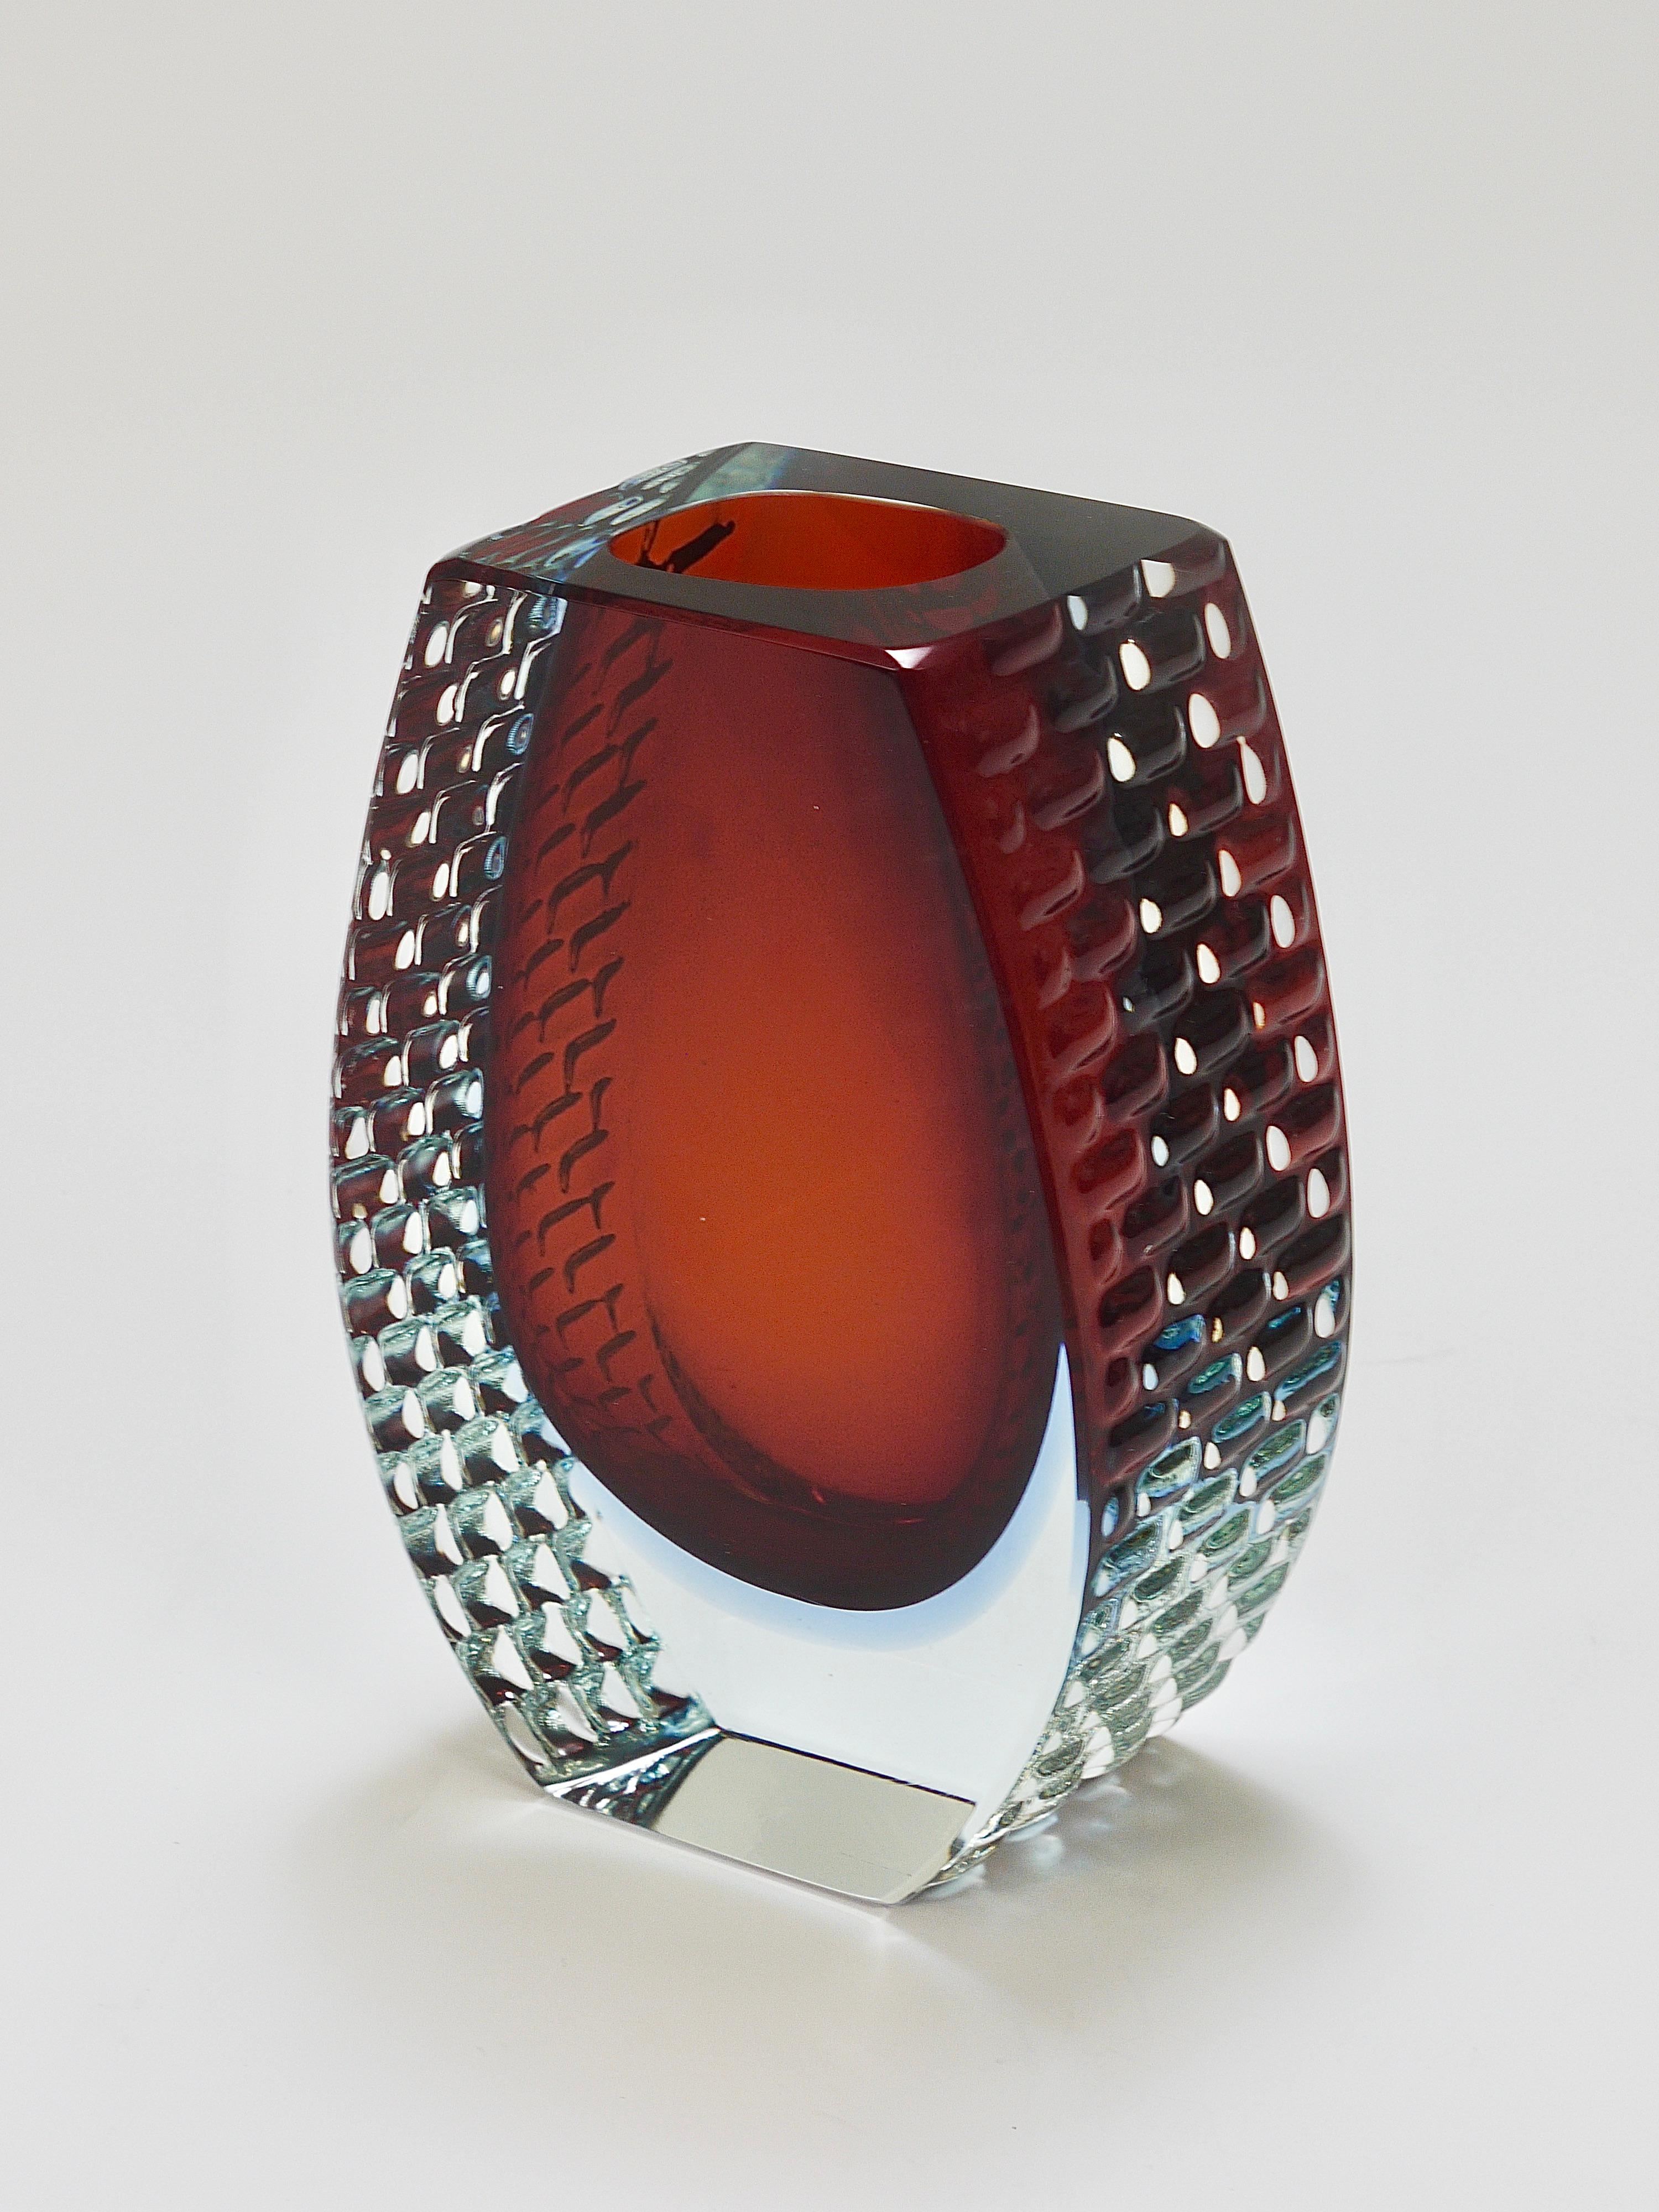 Large Mandruzzato Sommerso Murano Textured Facetted Art Glass Vase, Italy, 1970s For Sale 11